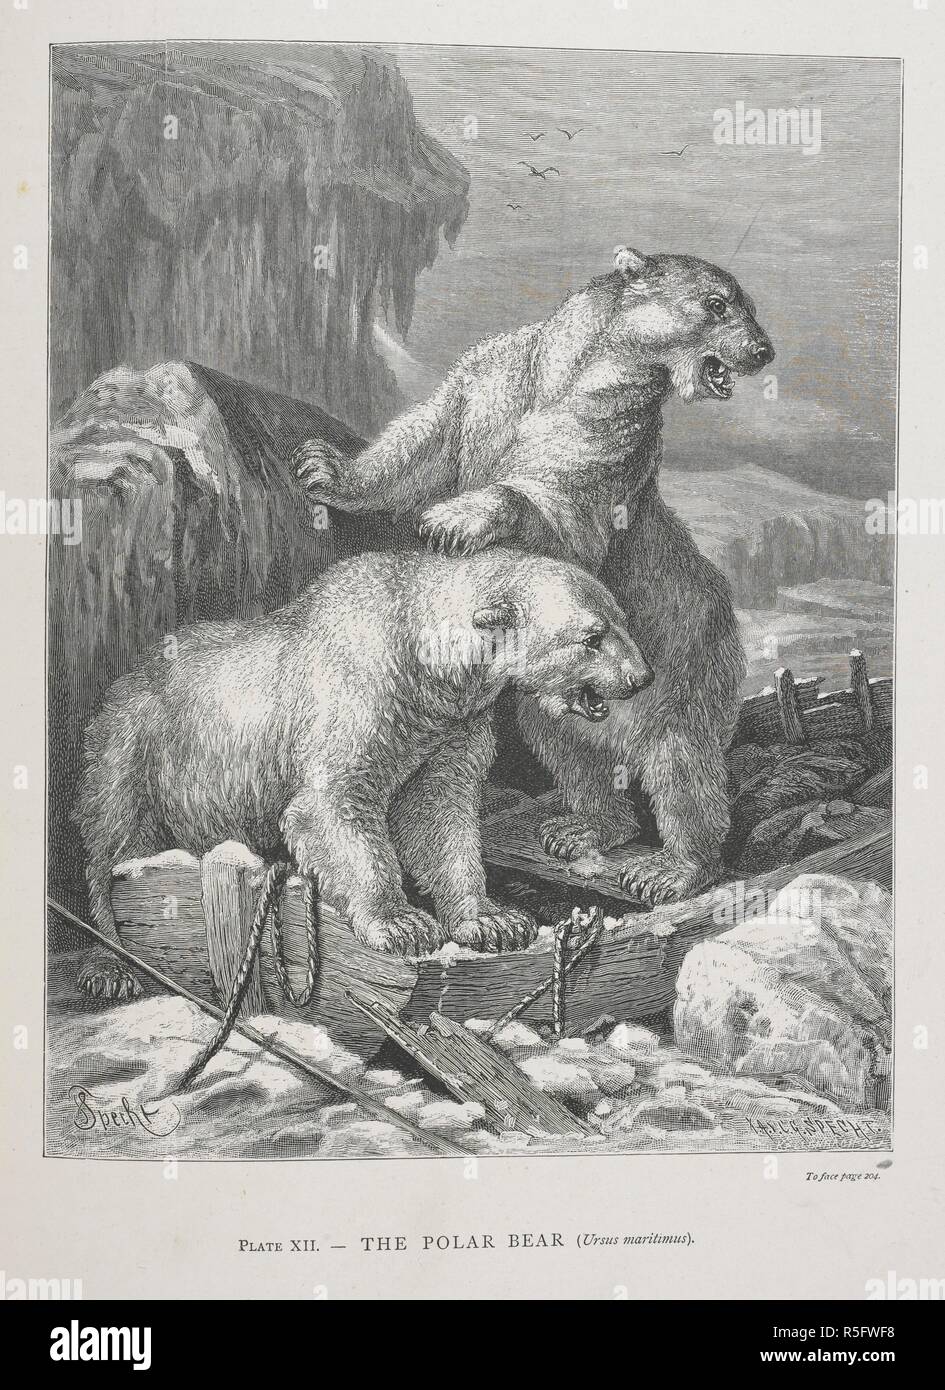 The Polar Bear. The Geographical Distribution of Animals, with a study of the relations of living and extinct faunas as elucidating the past changes of the earth's surface. ... . London, 1876. Source: 07209.dd.1 plate XII. Author: WALLACE, ALFRED RUSSEL. Stock Photo